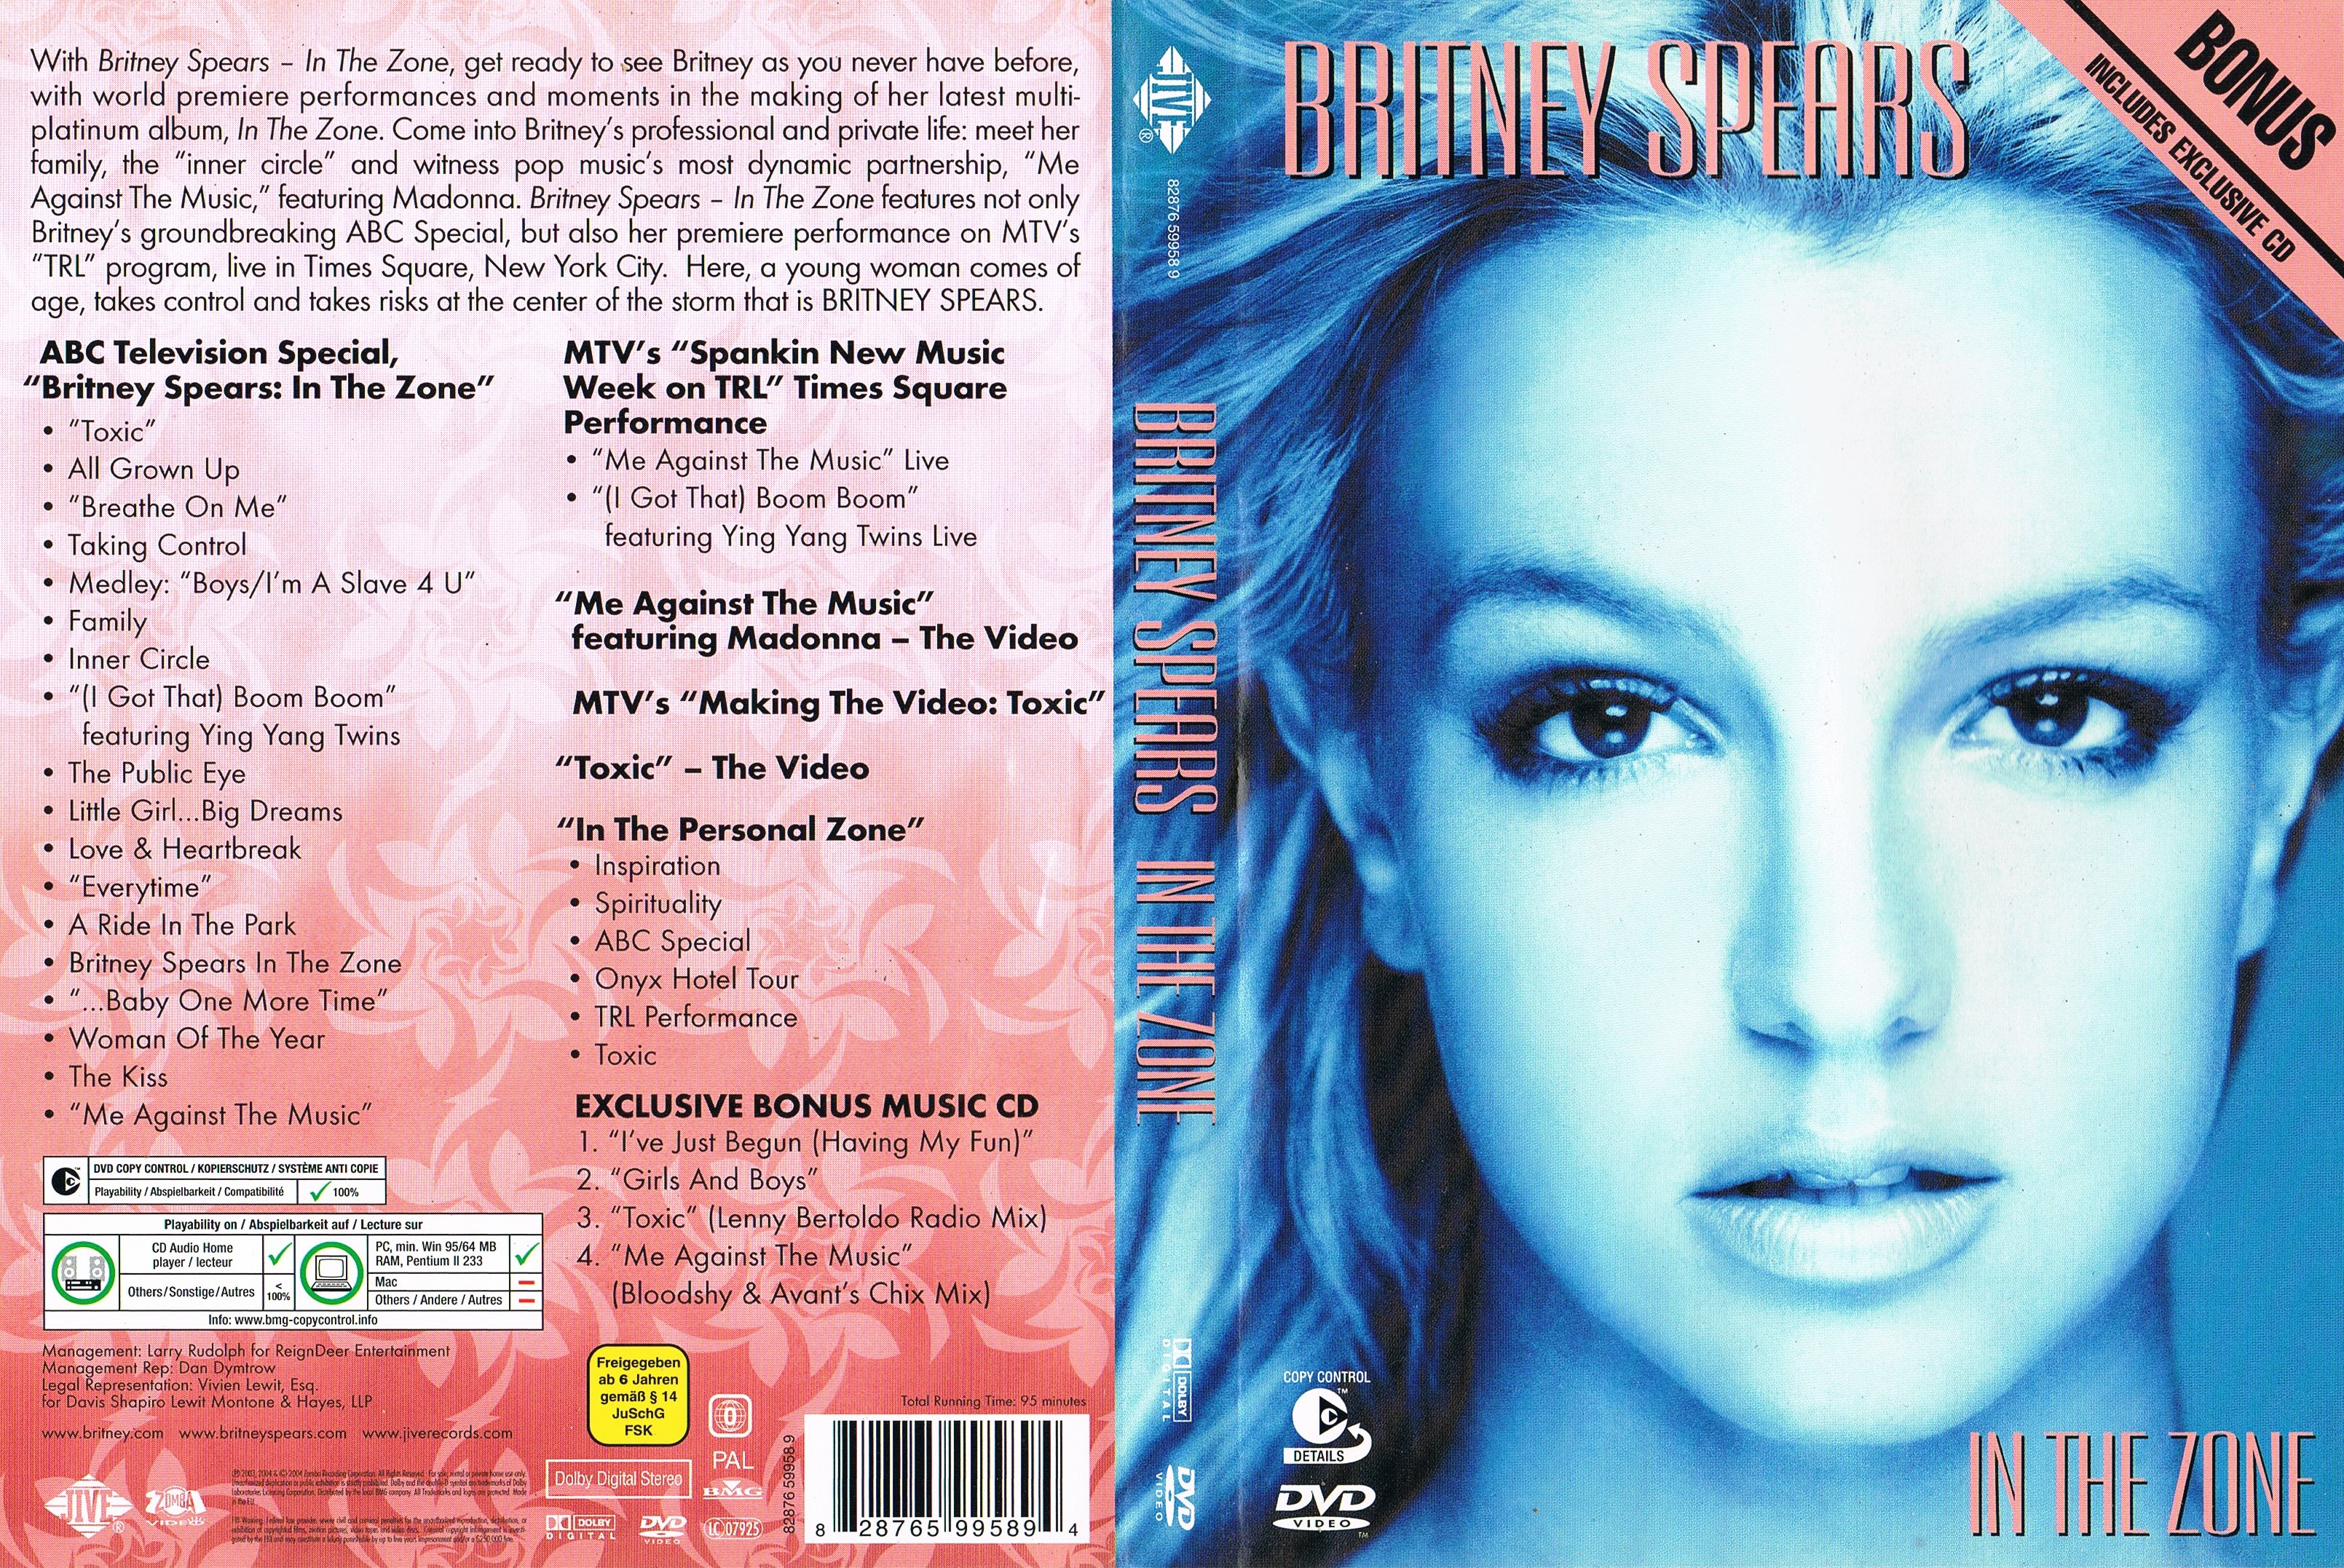 Jaquette DVD Britney Spears  In The Zone